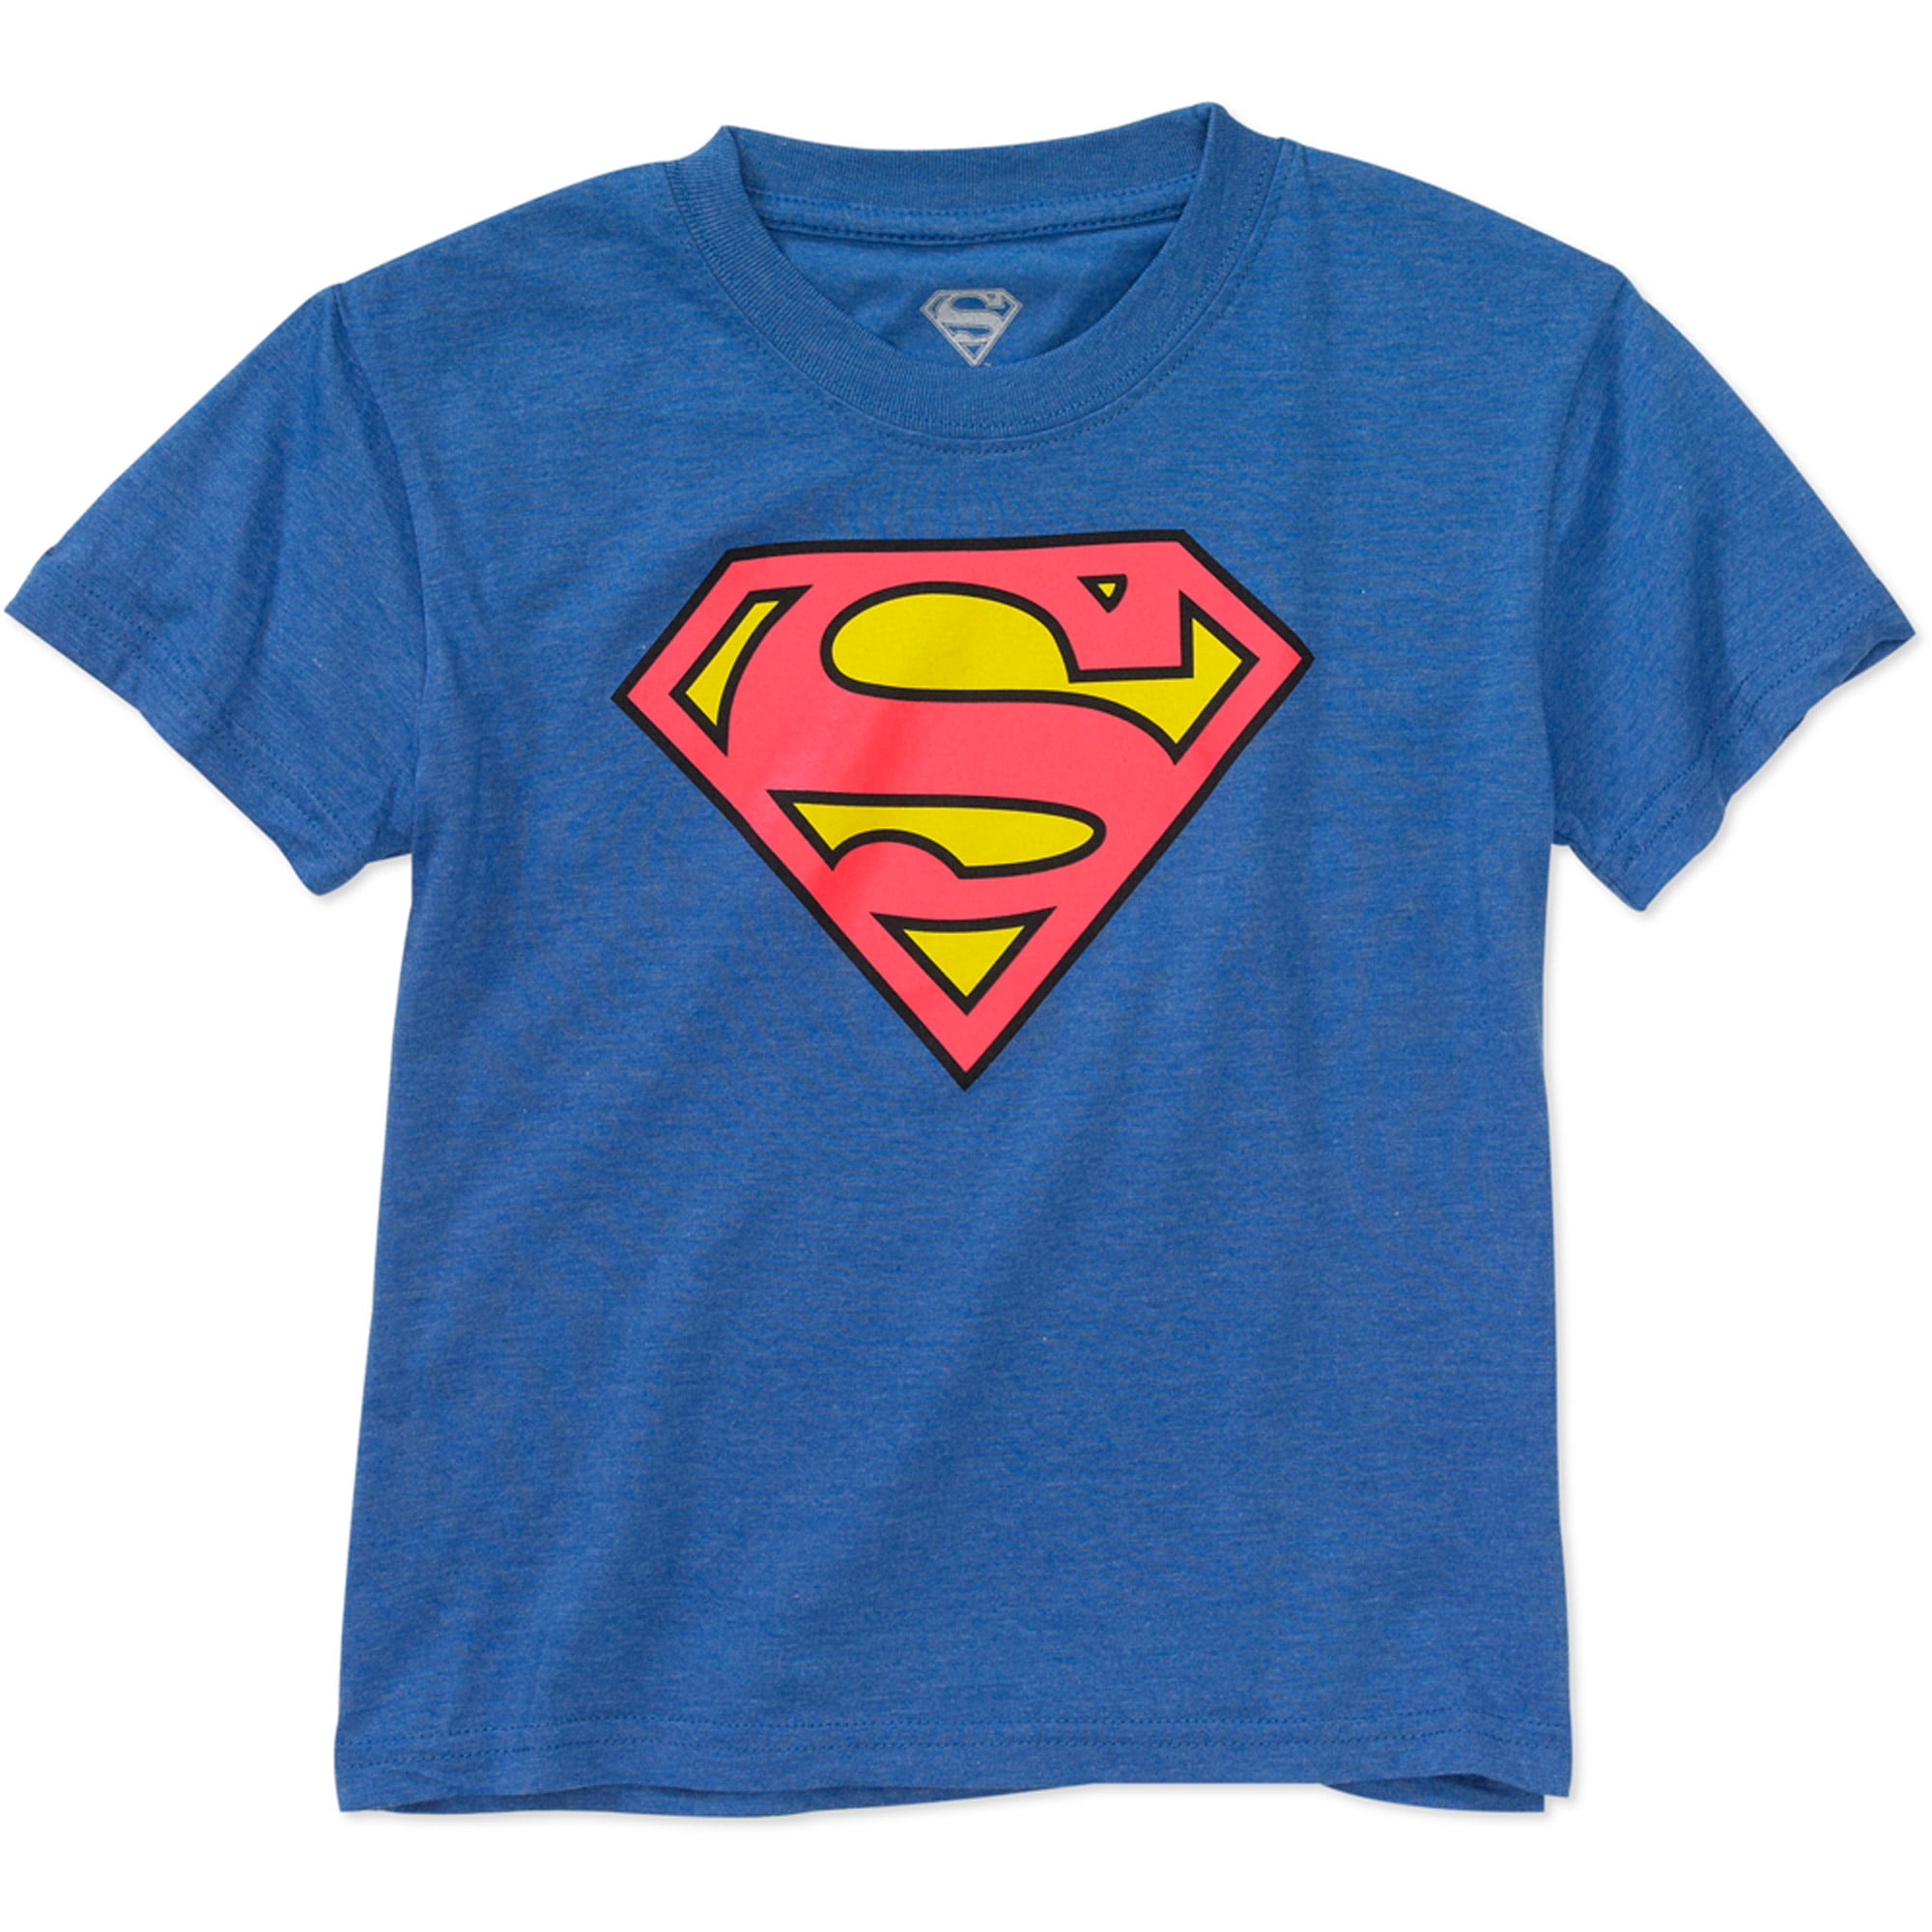 Baby-Boys T-Shirt Distressed Super Little Brother Super Hero